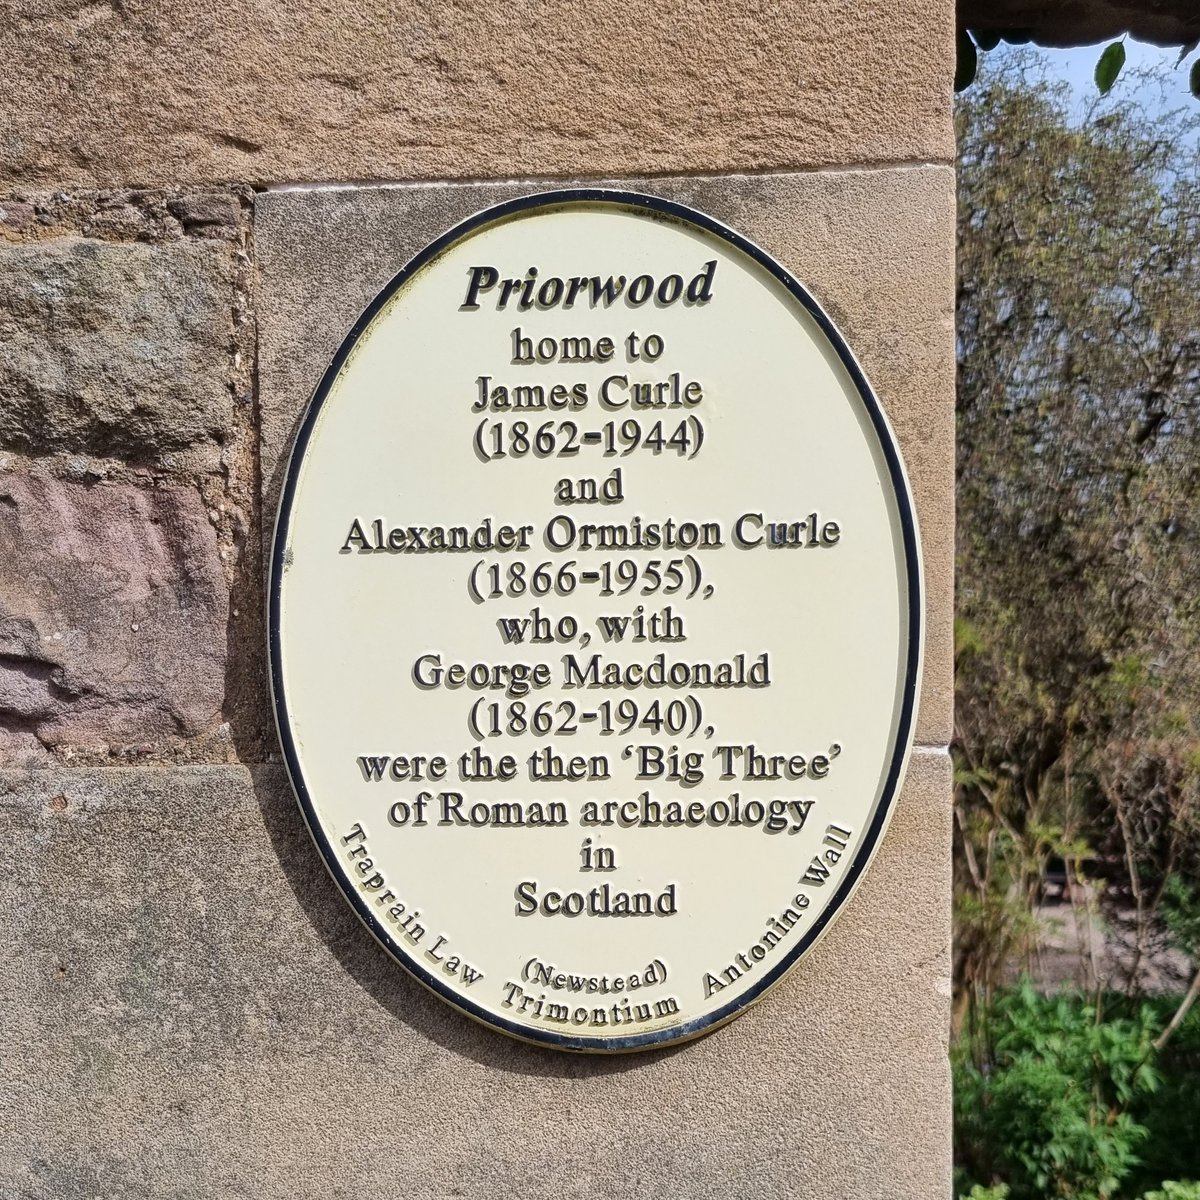 Spotted in Melrose last week, a plaque to the Curle brothers and George Macdonald, the 'Big Three' of Roman archaeology in Scotland in the early 20th century. If you ask me, we need to nominate a new 'Big Three' for the 21st century - but who to include...? @TrimontiumTrust